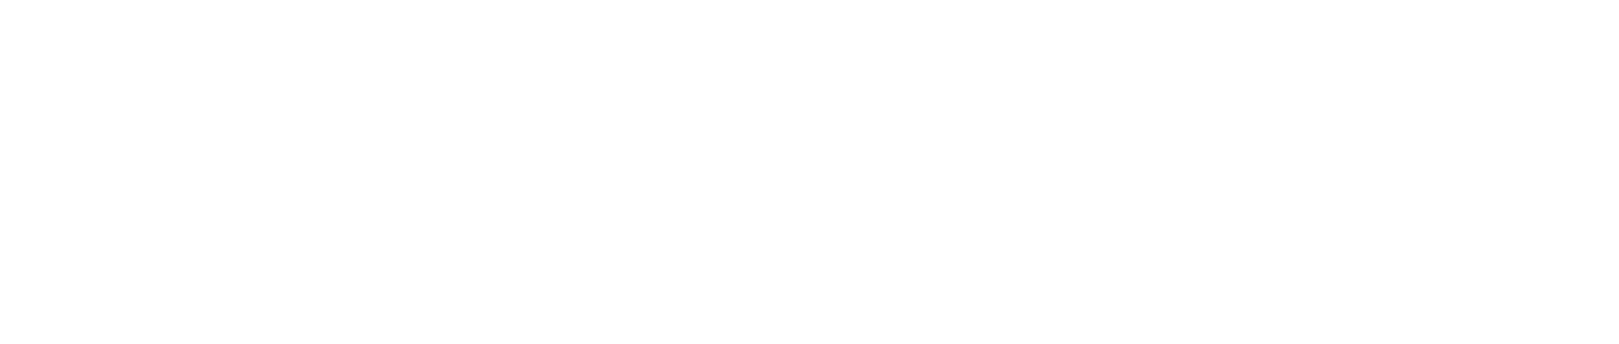 Moody's logo large for dark backgrounds (transparent PNG)